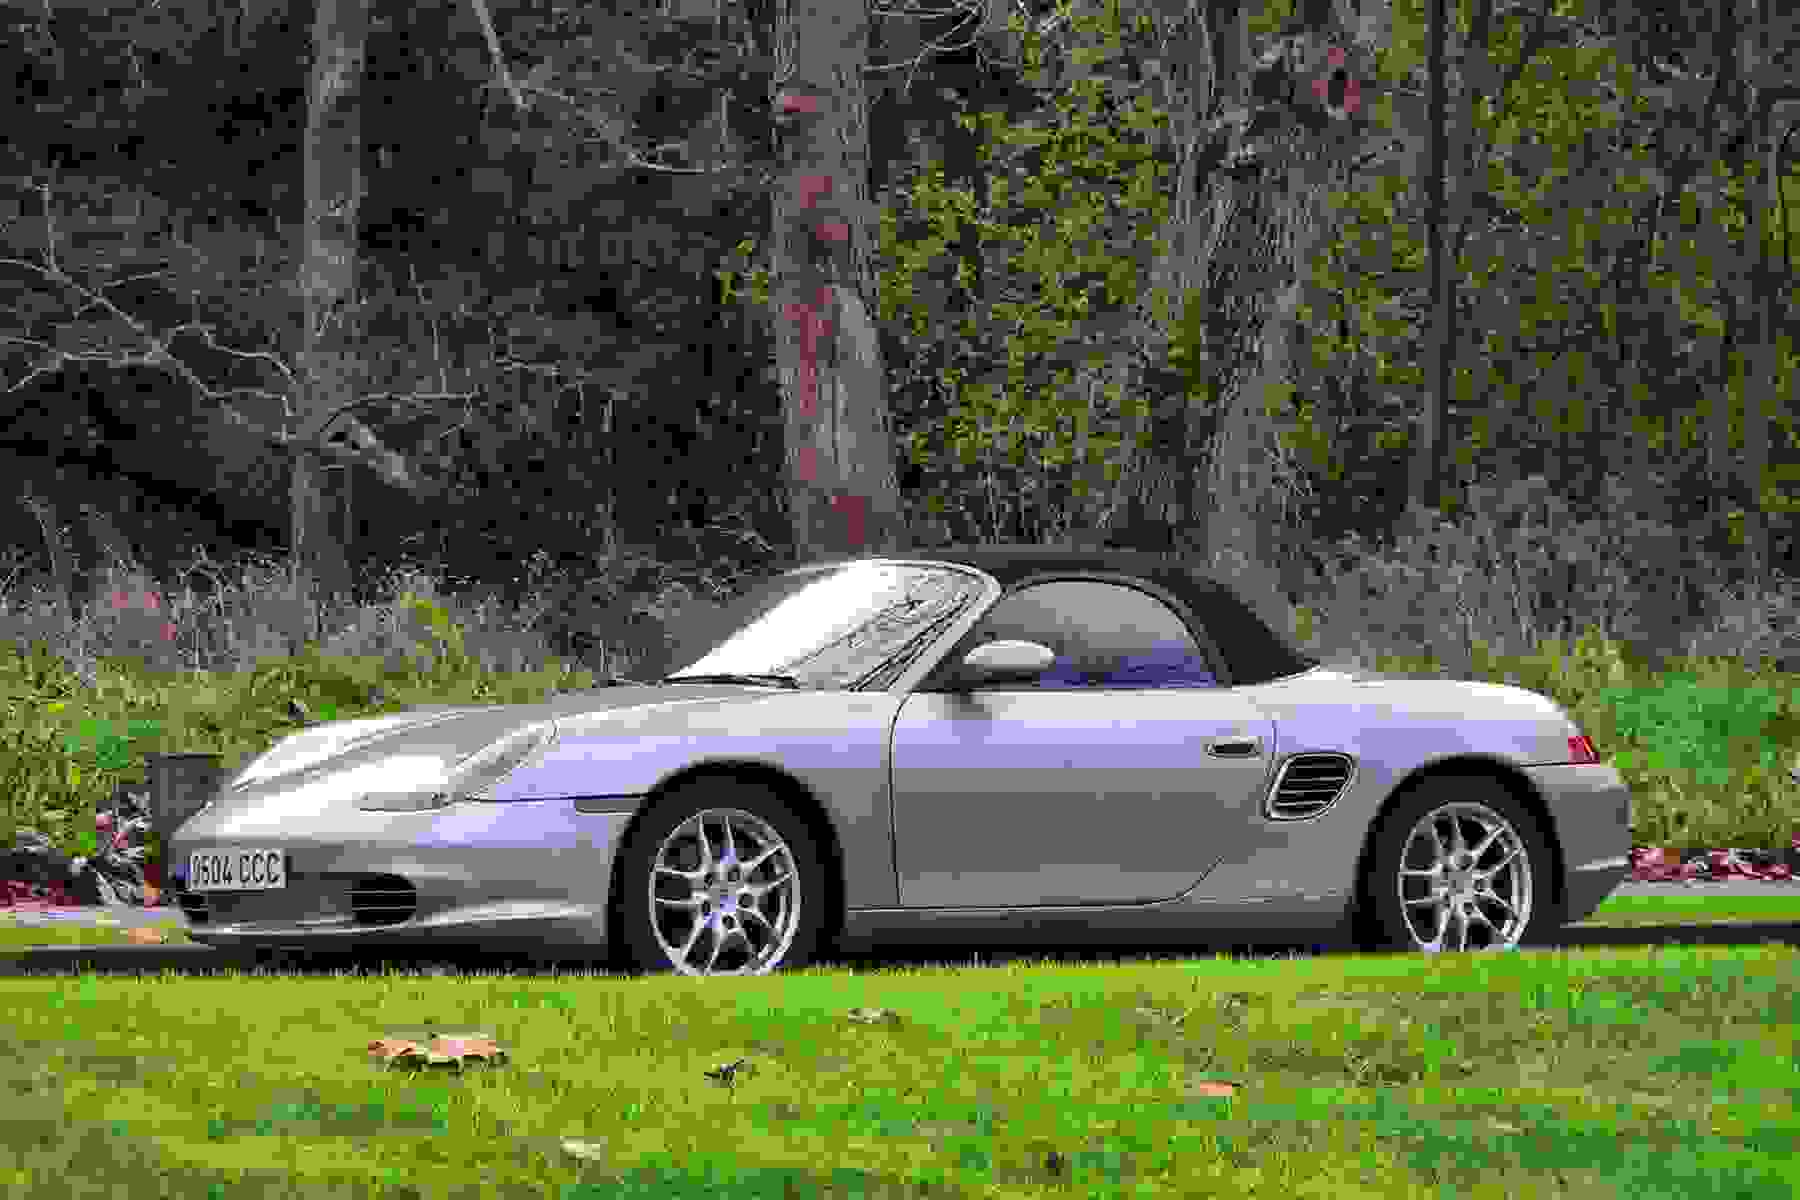 Porsche Boxster 986 Buying Guide: Mid-engined sportscar for the masses